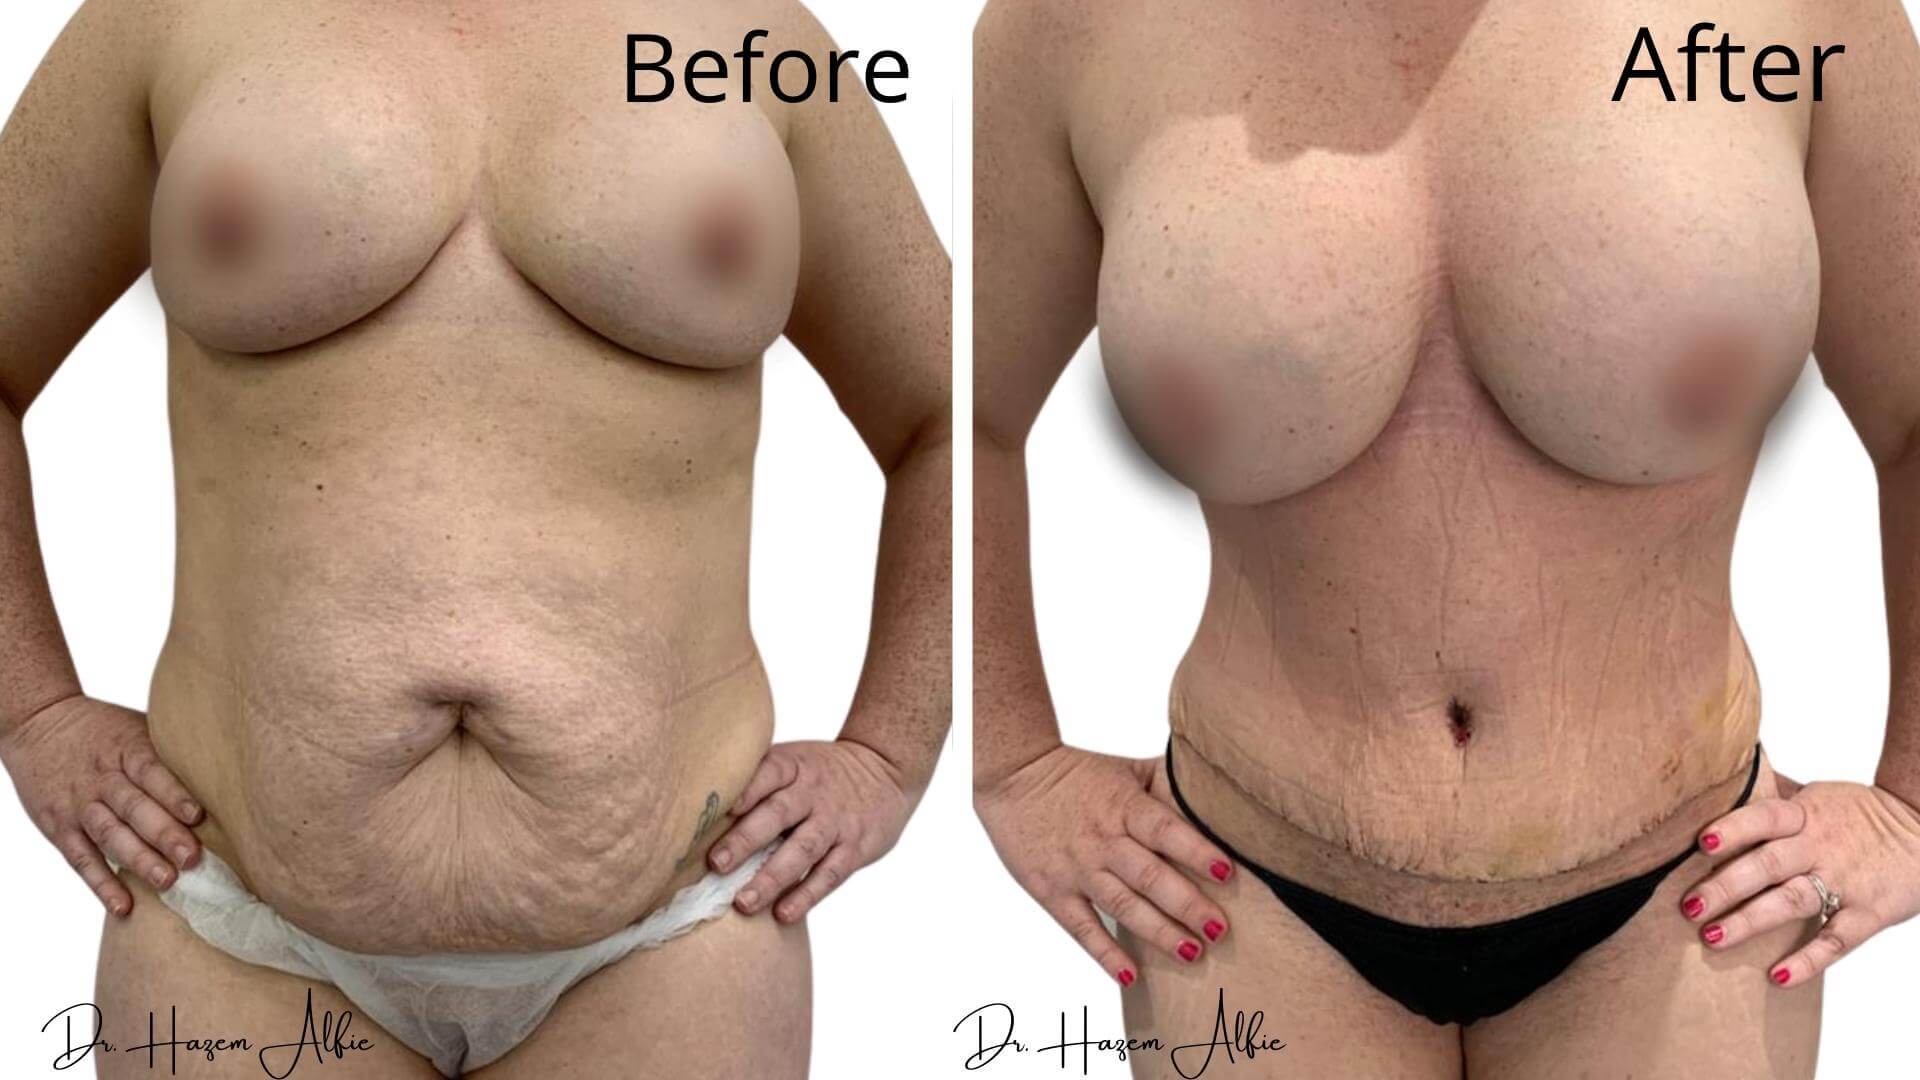 A woman's body before and after surgery.